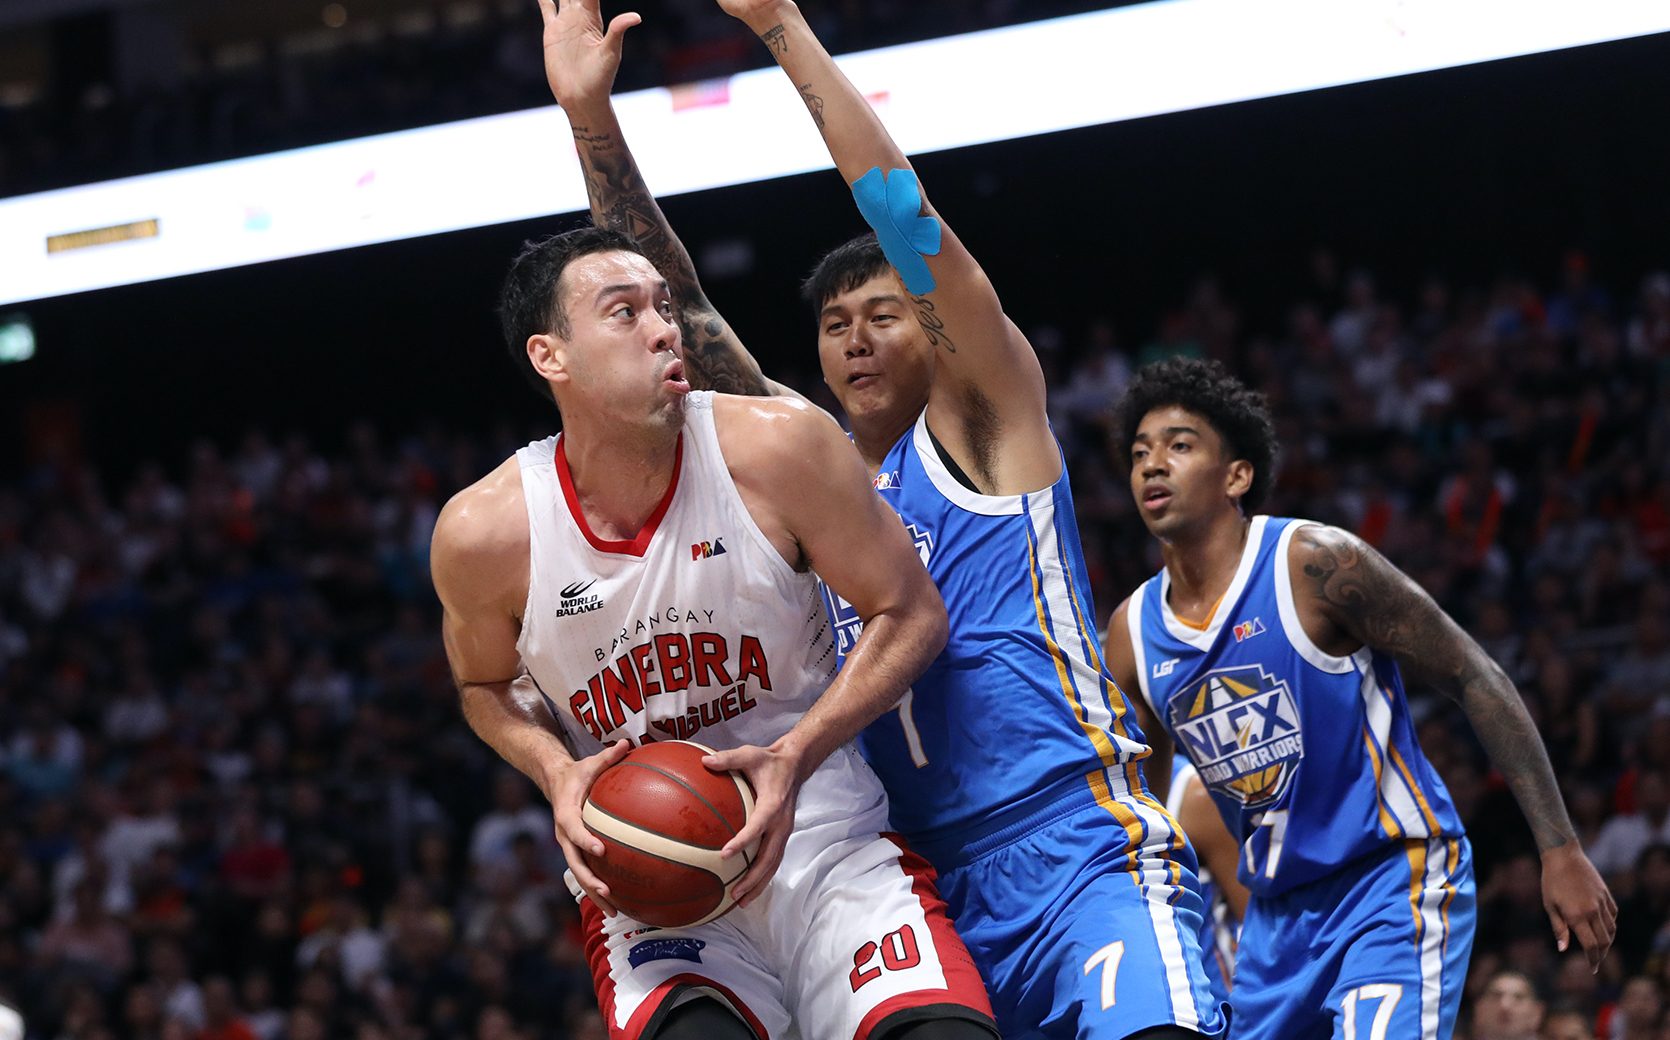 Despite Ginebra exit, Slaughter says ‘best basketball’ ahead of him